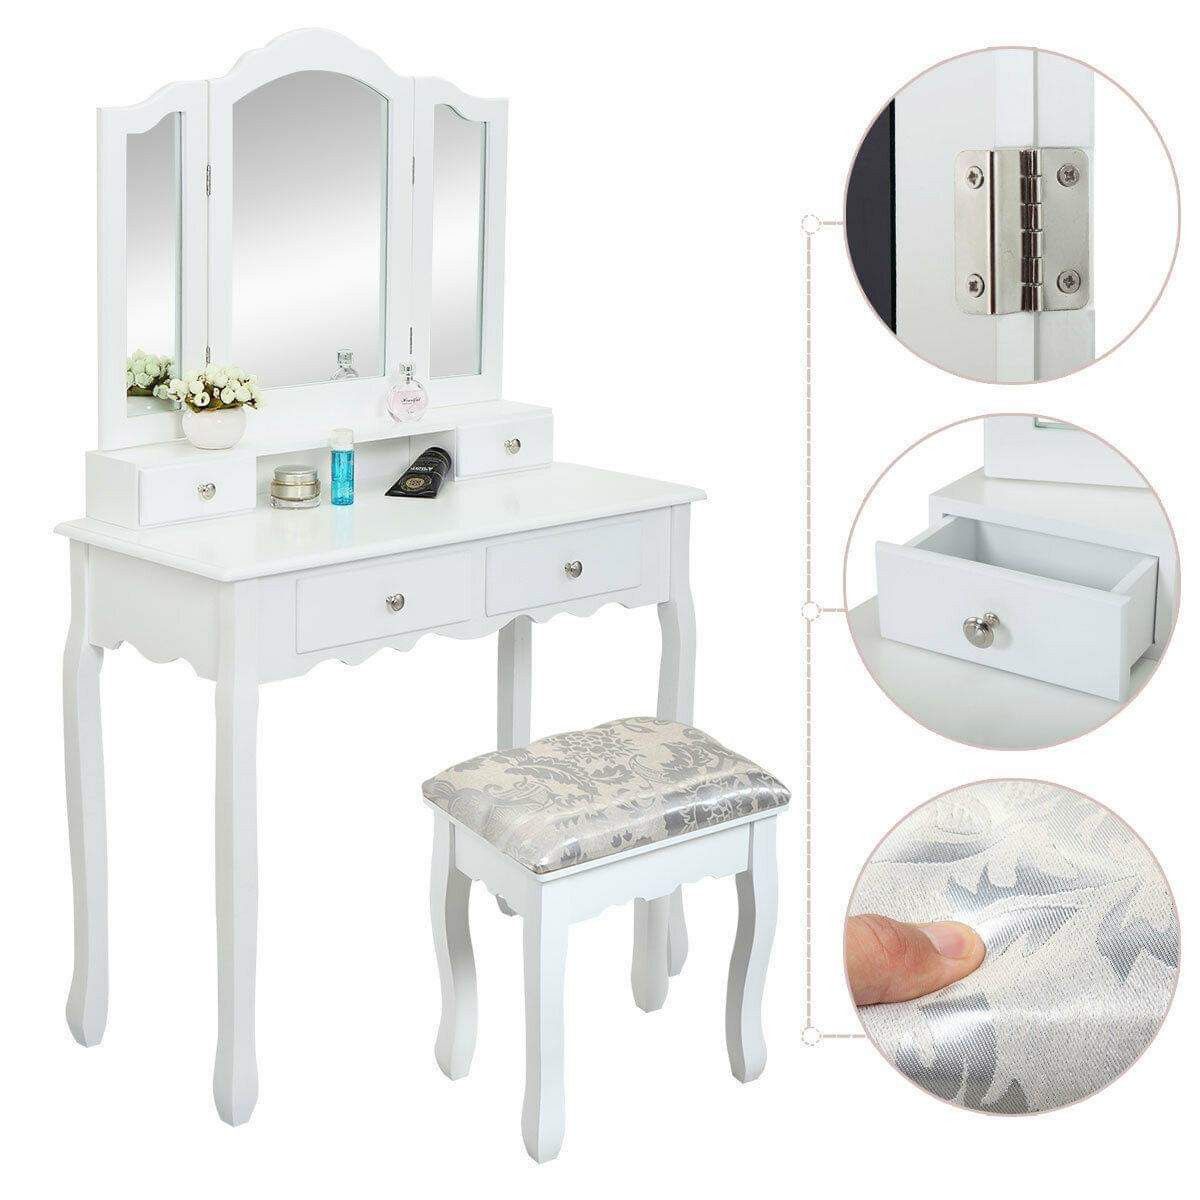 🔥BRAND NEW White Vanity Set with Foldable Mirrors